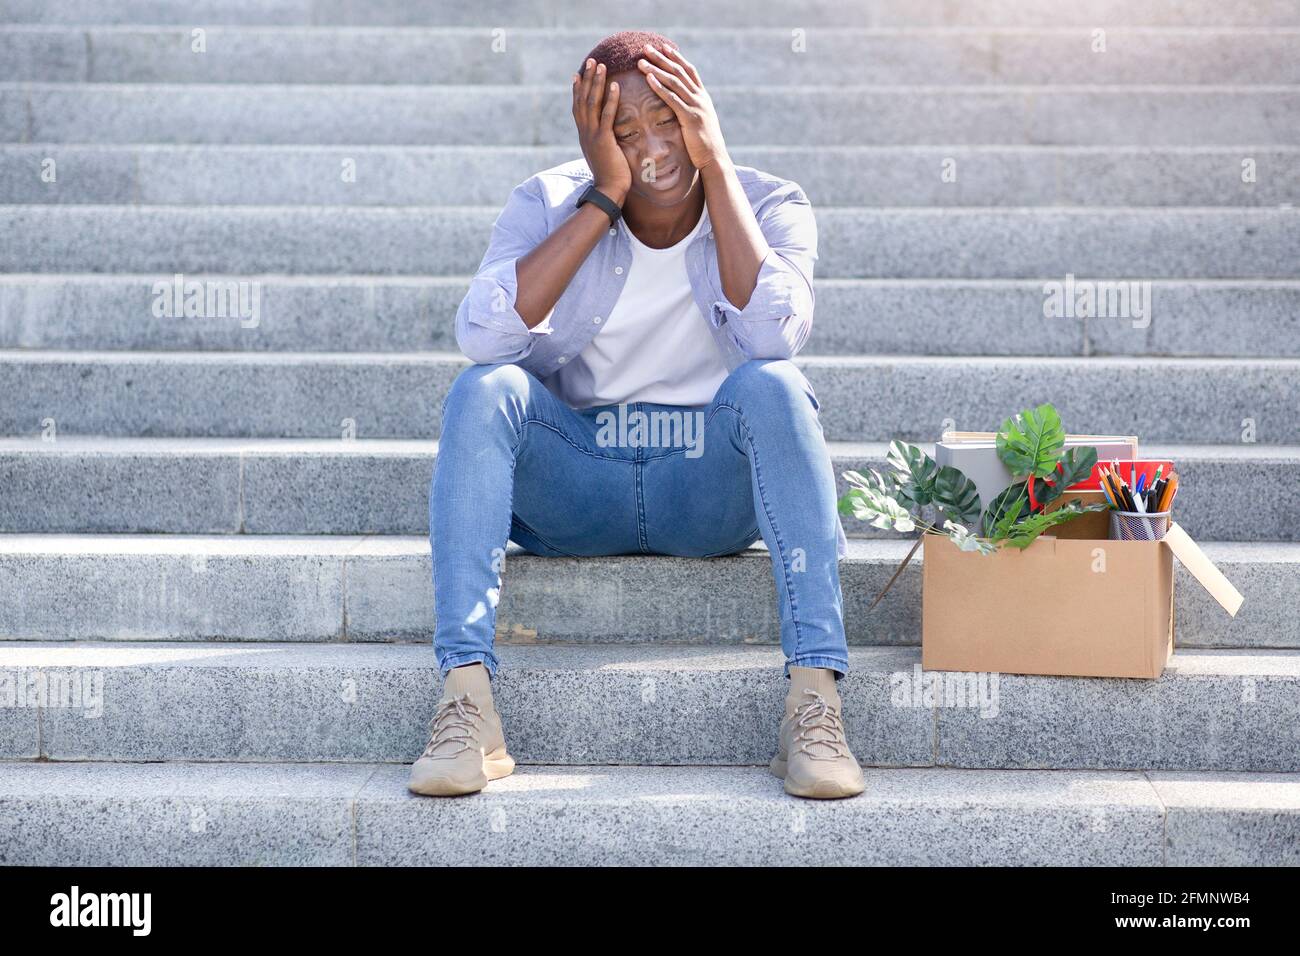 Economic crisis. Desperate African American man with personal belongings sitting on stairs outdoors after being fired Stock Photo